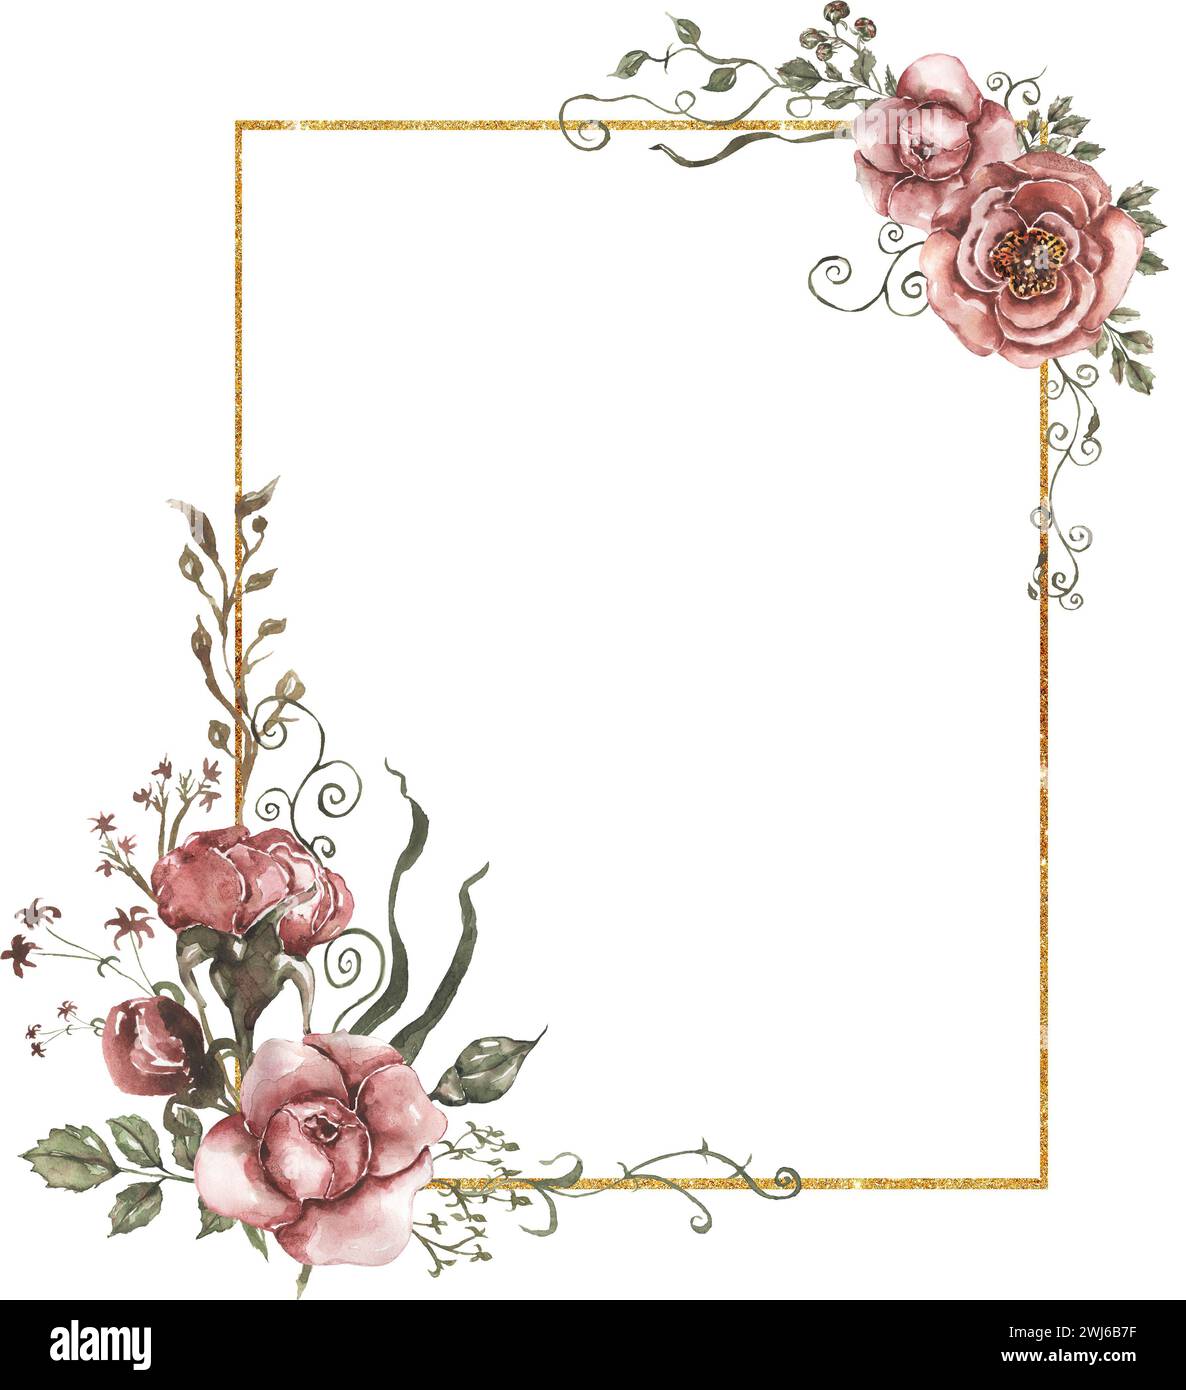 Watercolor red peony flowers, leaves and golden frame illustration Stock Photo